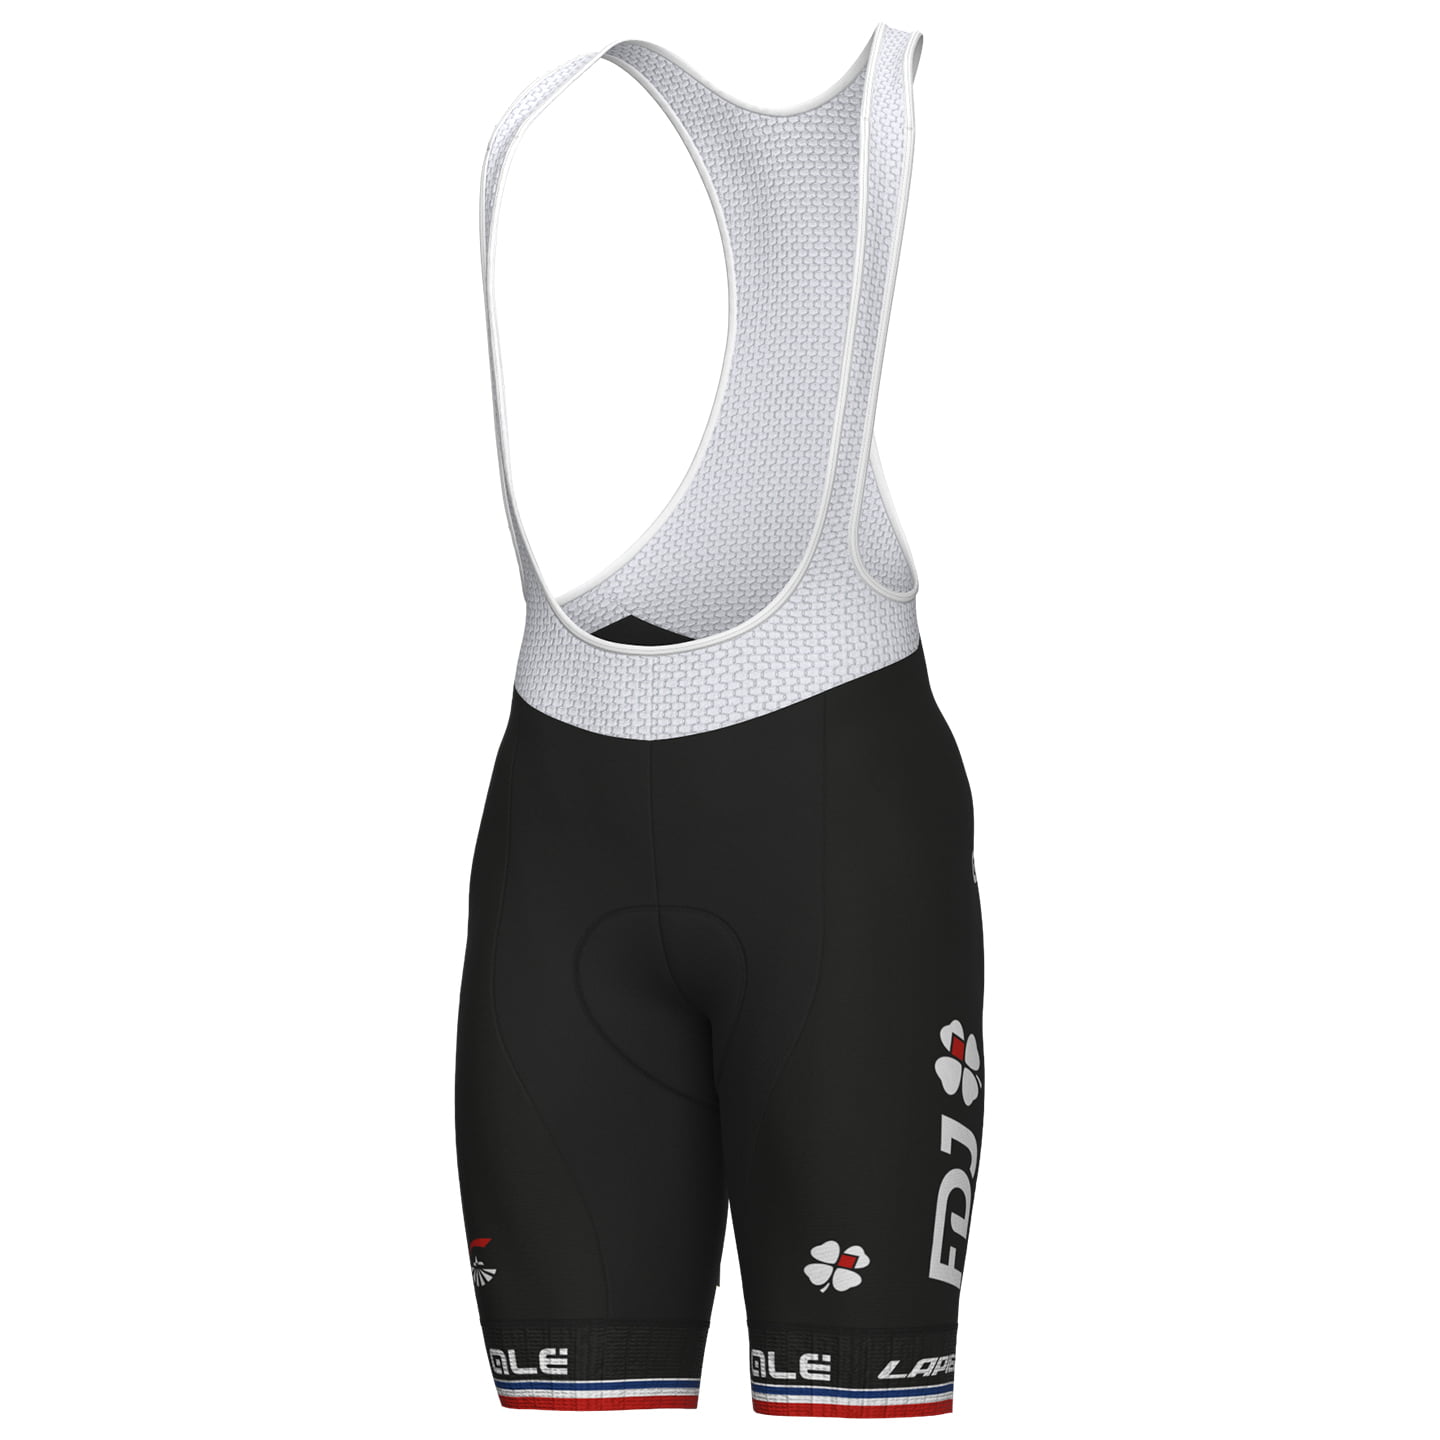 GROUPAMA - FDJ French Champion 2023 Bib Shorts, for men, size 2XL, Cycle trousers, Cycle gear